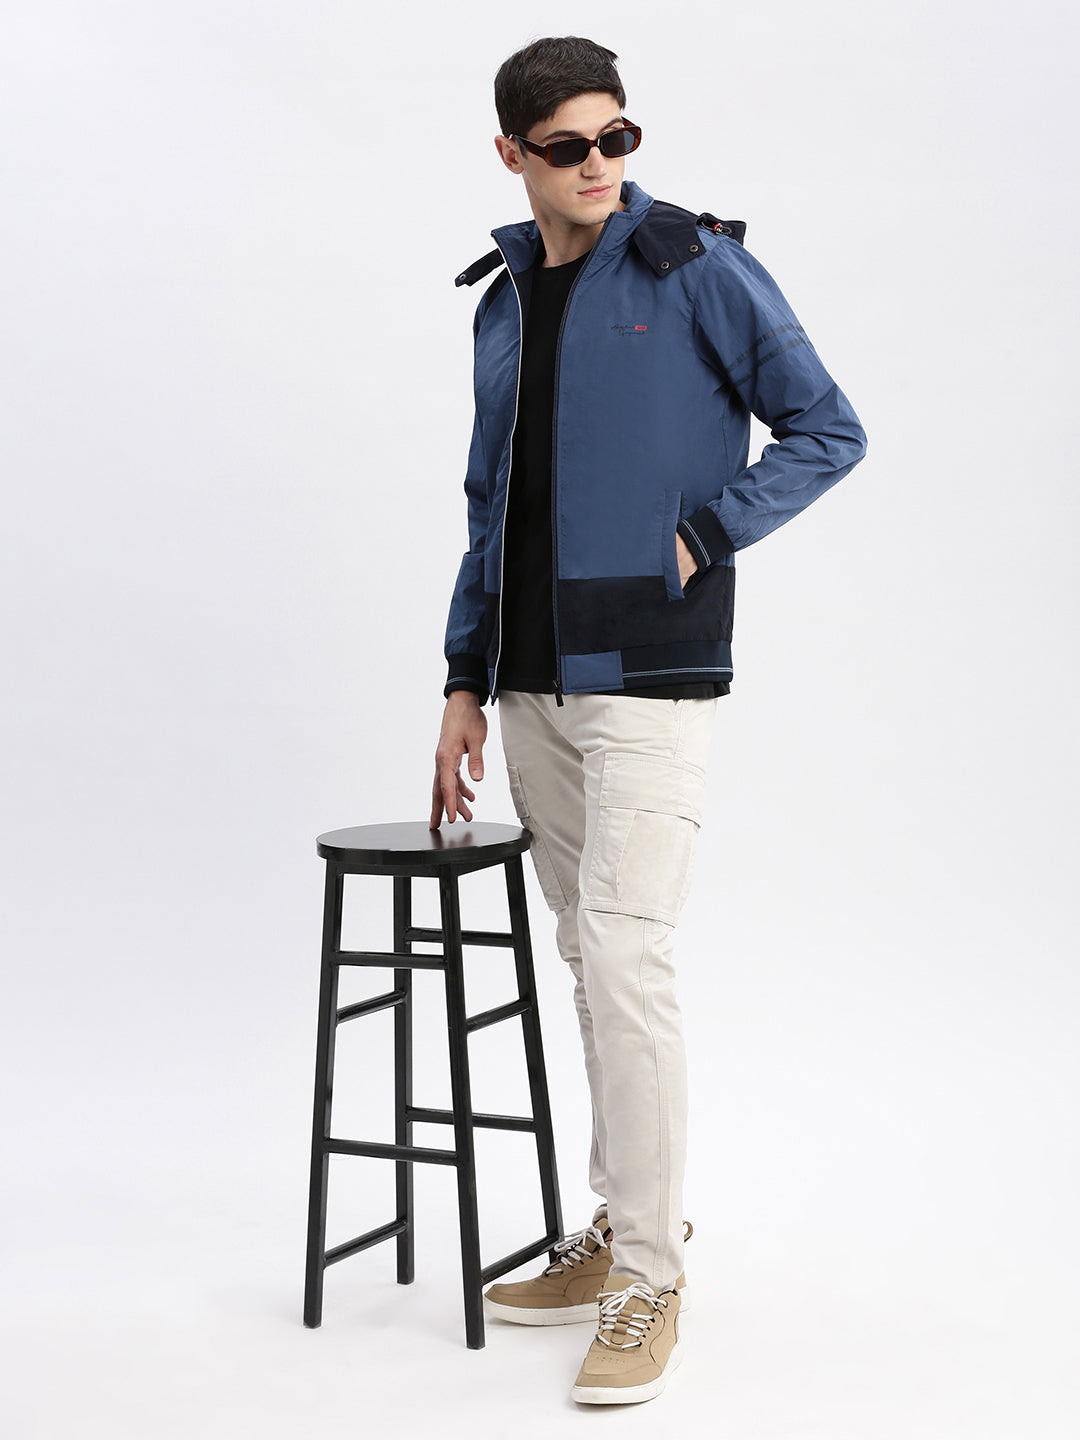 Men Colourblocked Mock Collar Blue Bomber Jacket Comes with Detachable Hoodie